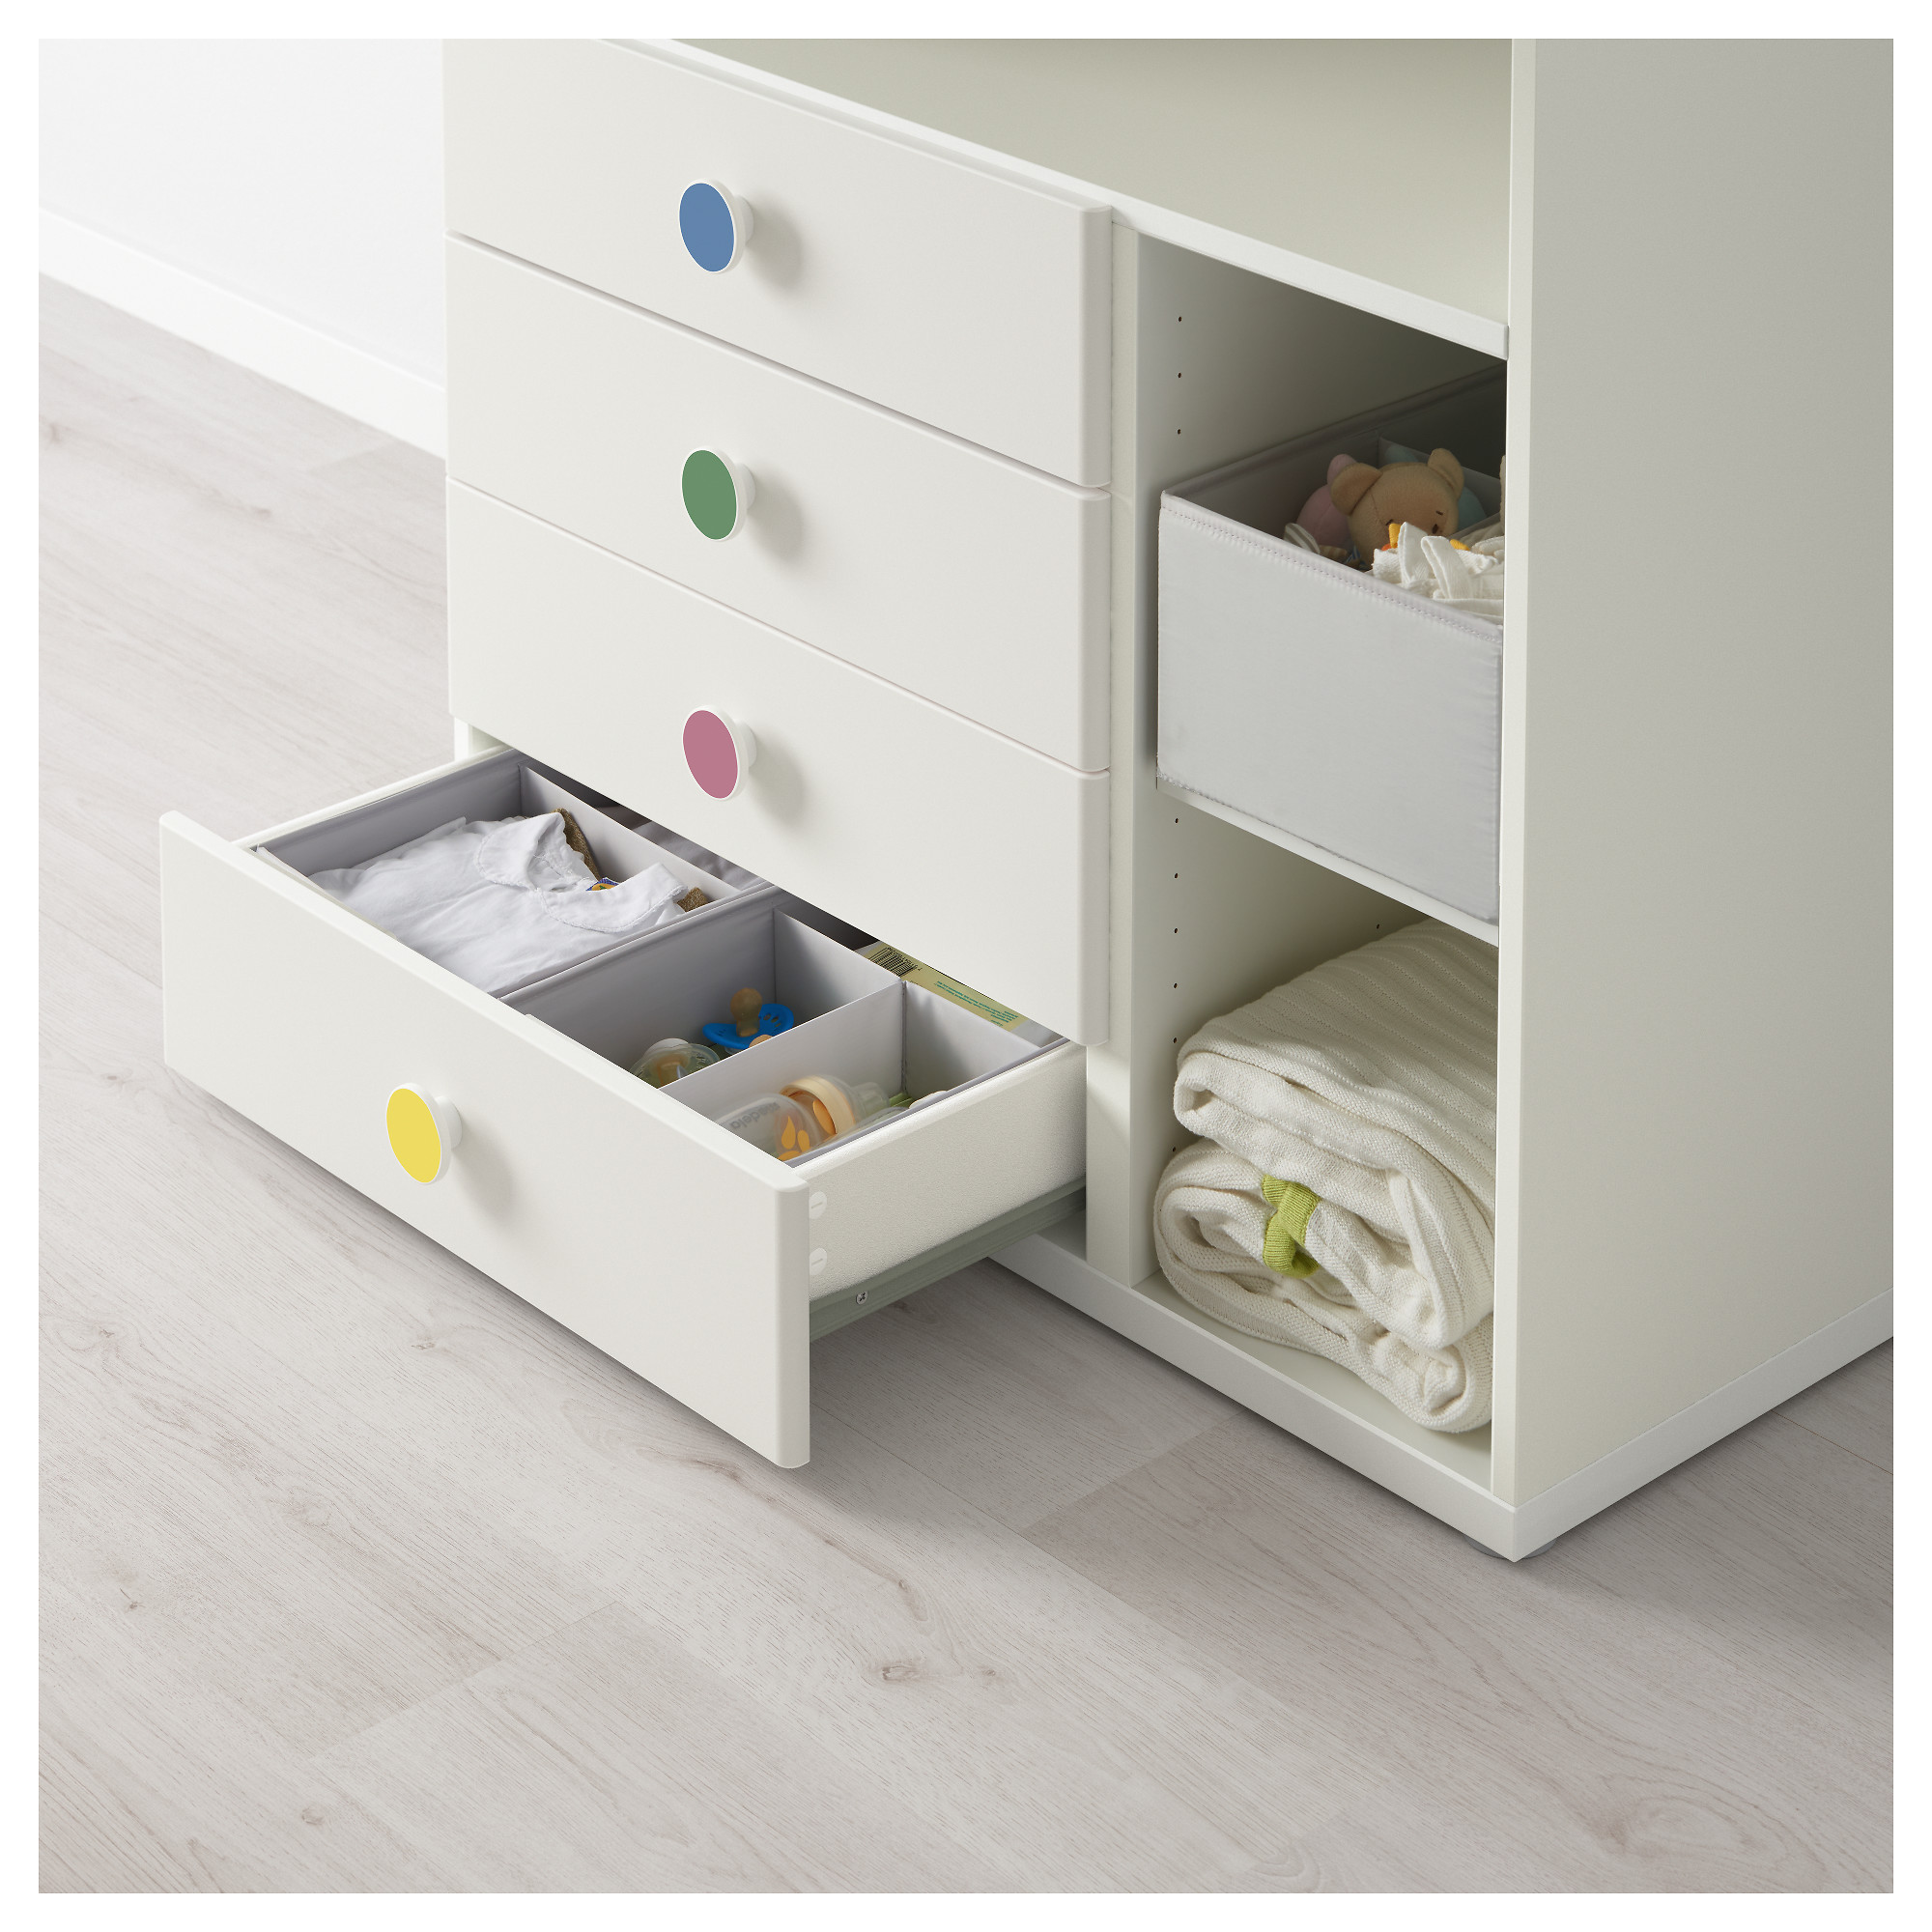 changing table with drawers